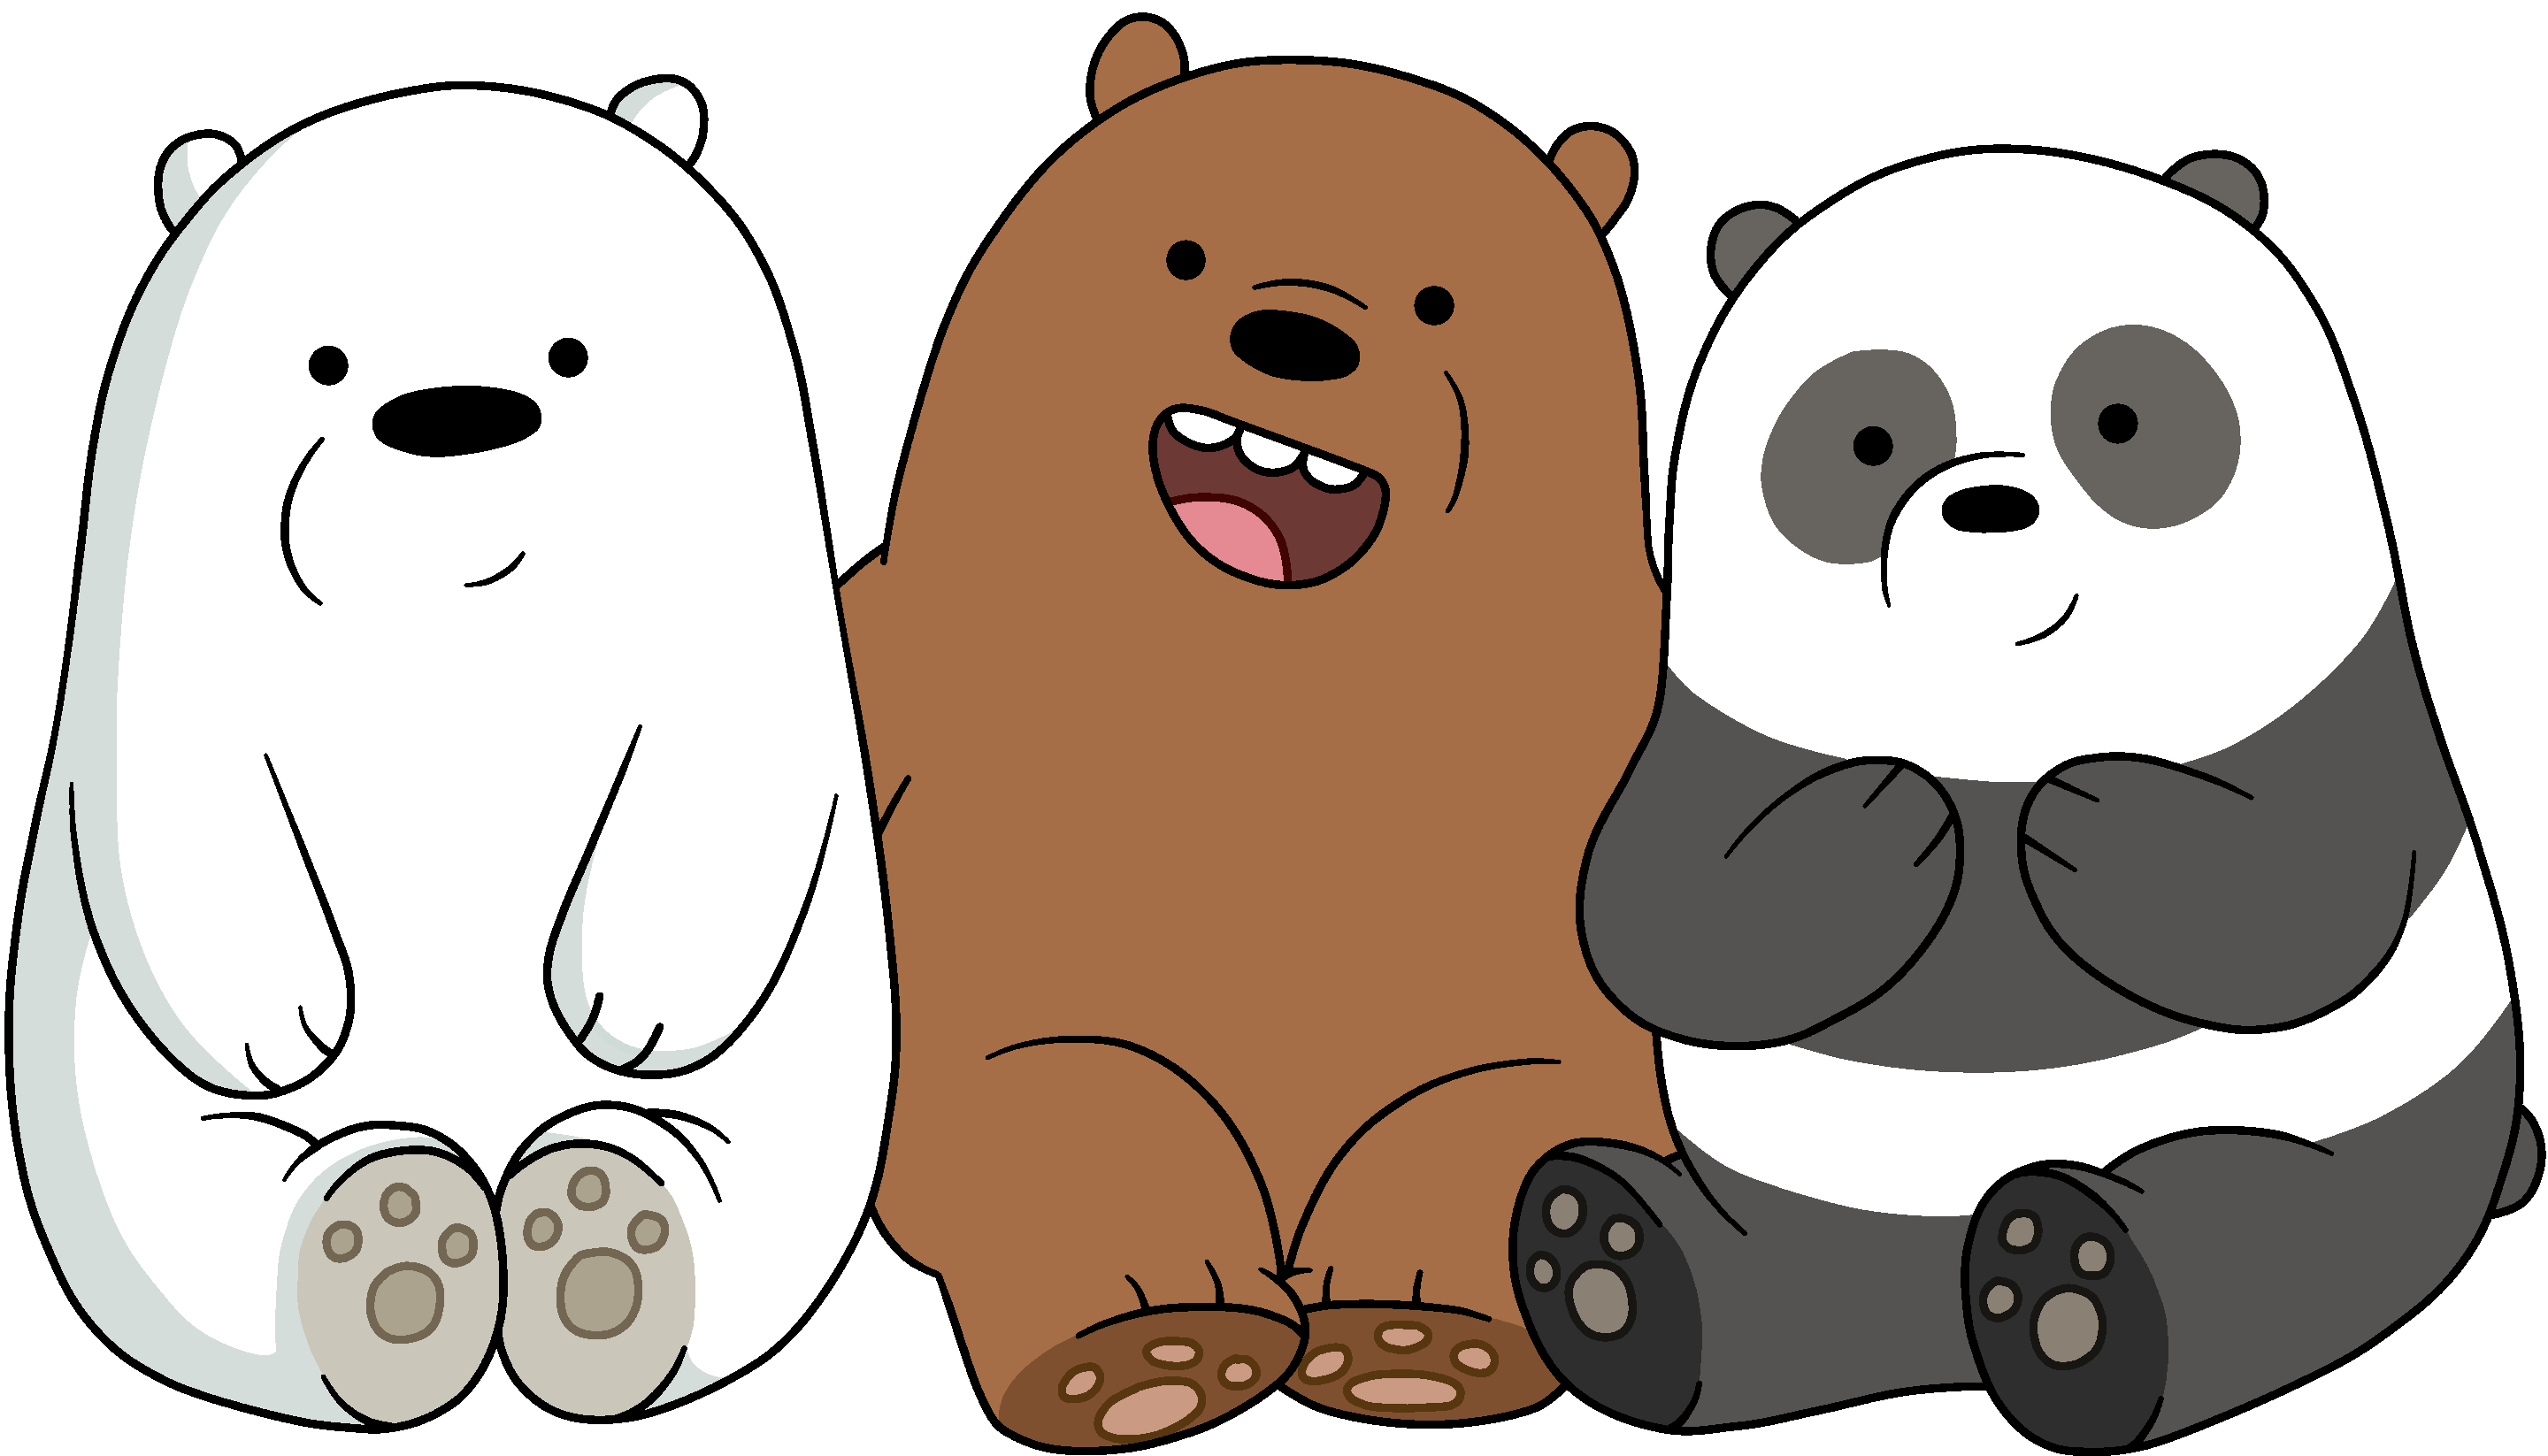 We Bare Bears  Free online games and video  Cartoon Network